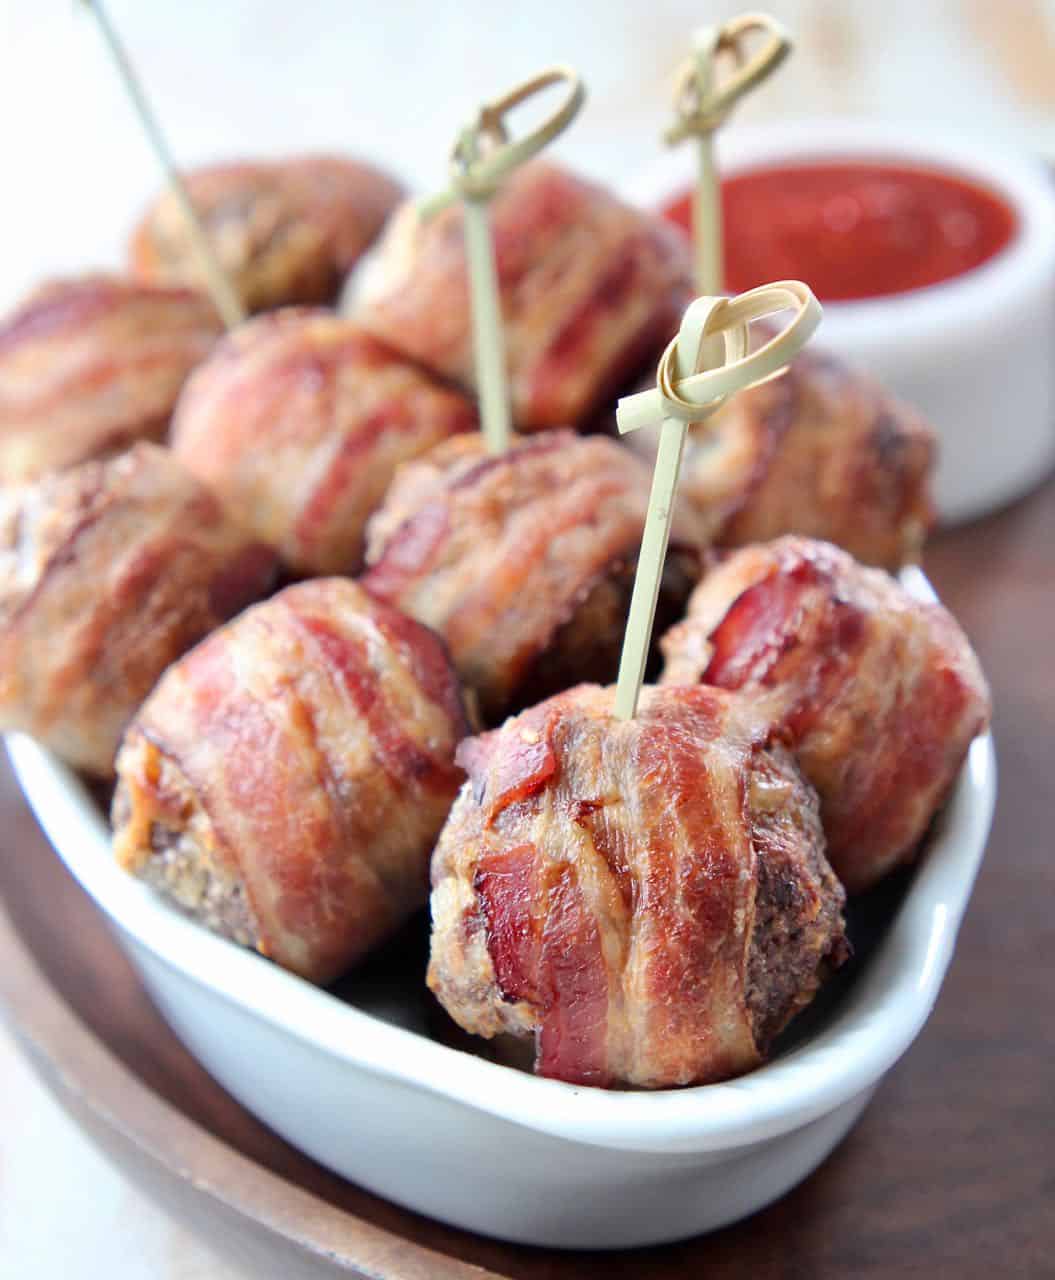 Bacon wrapped meatballs in bowl with wood skewers